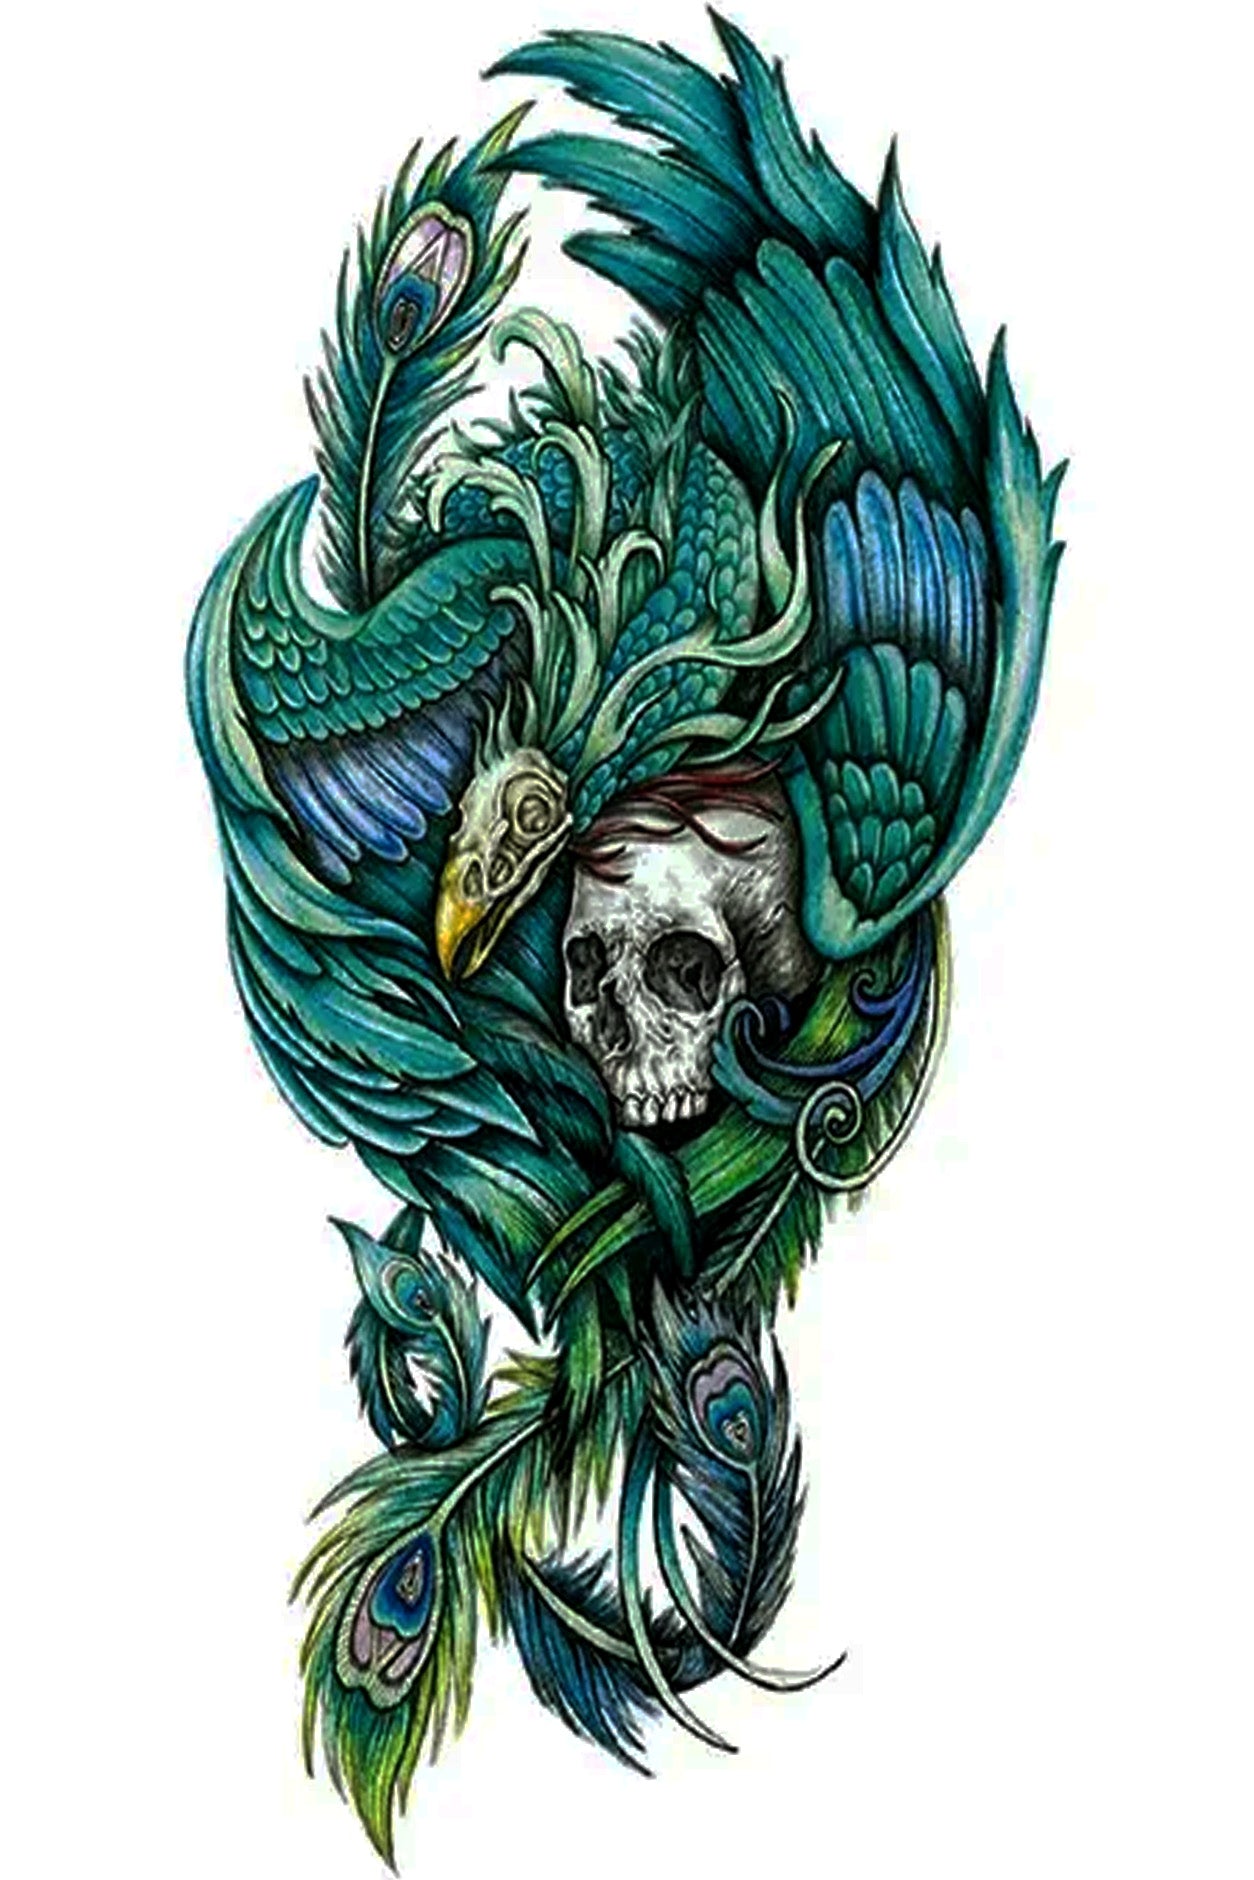 A teal winged dragon protects his treasurers of a skull and peacock feathers. This is a beautiful arrangement of teals and blues in a nestled dragon half arm tattoo.  Creatively wear this artwork on any part of your body, arm, leg, torso, or shoulder.